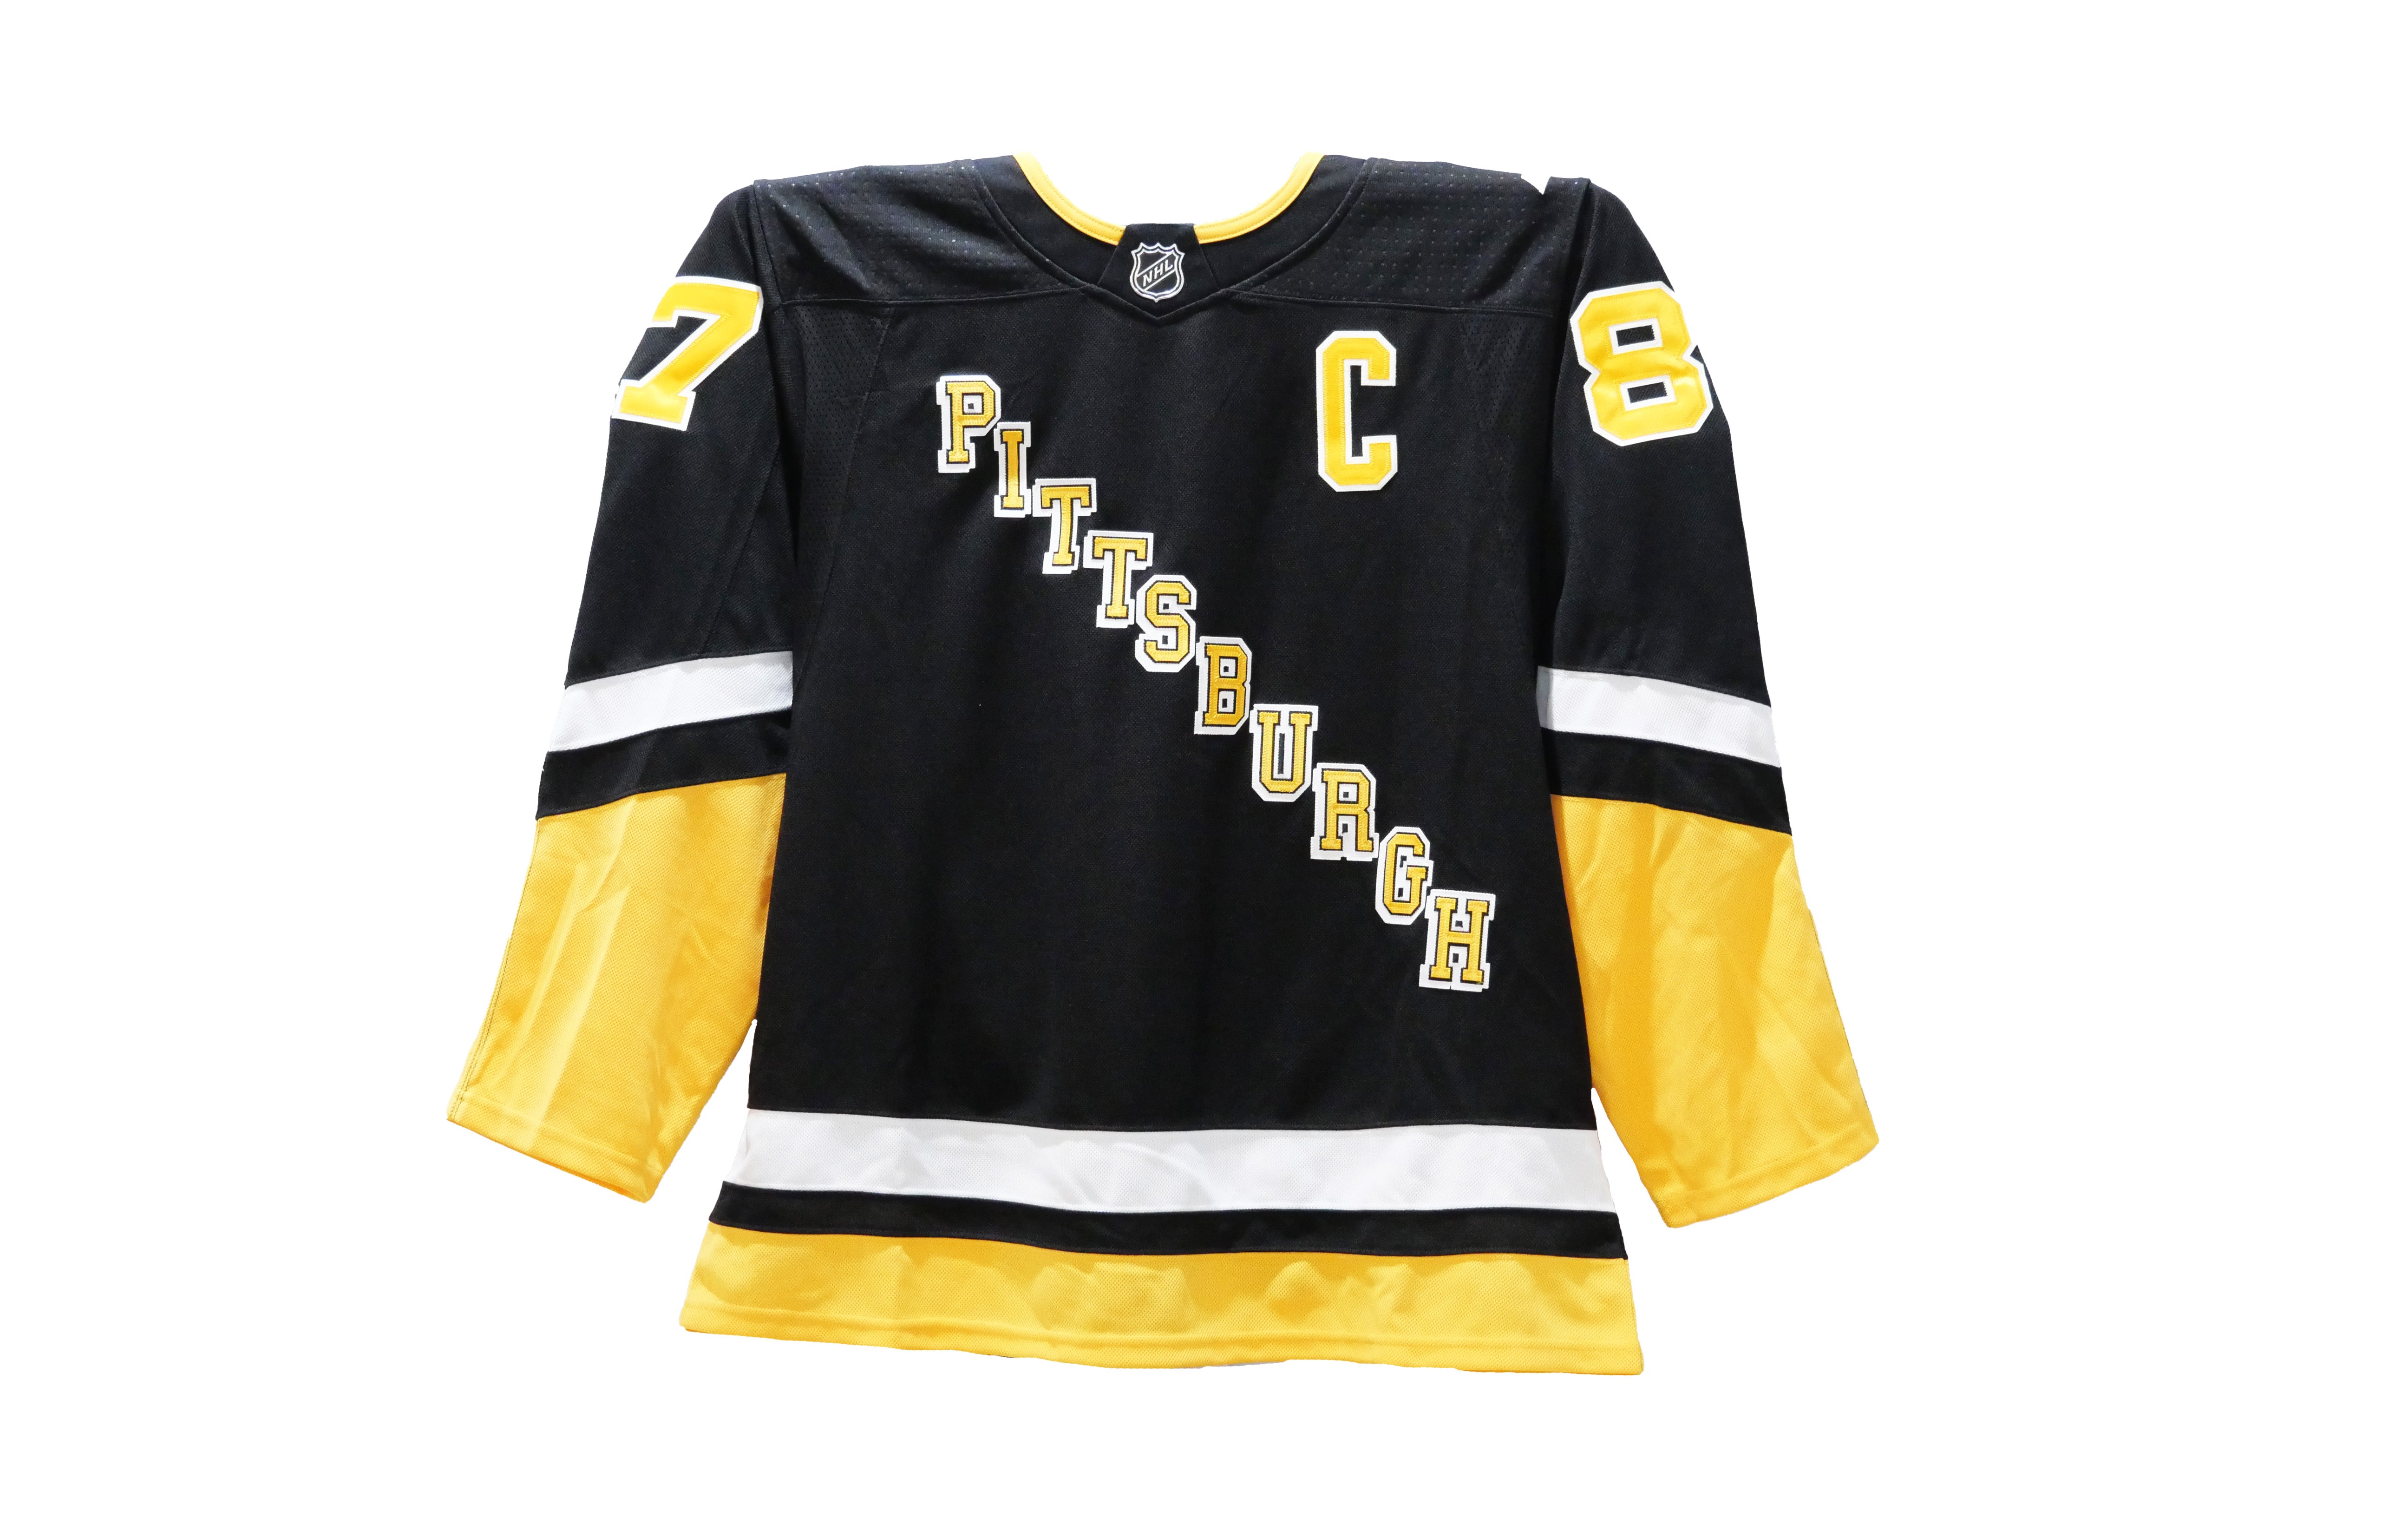 Sidney Crosby Authentic Autographed Pittsburgh Penguins Alternate Jersey